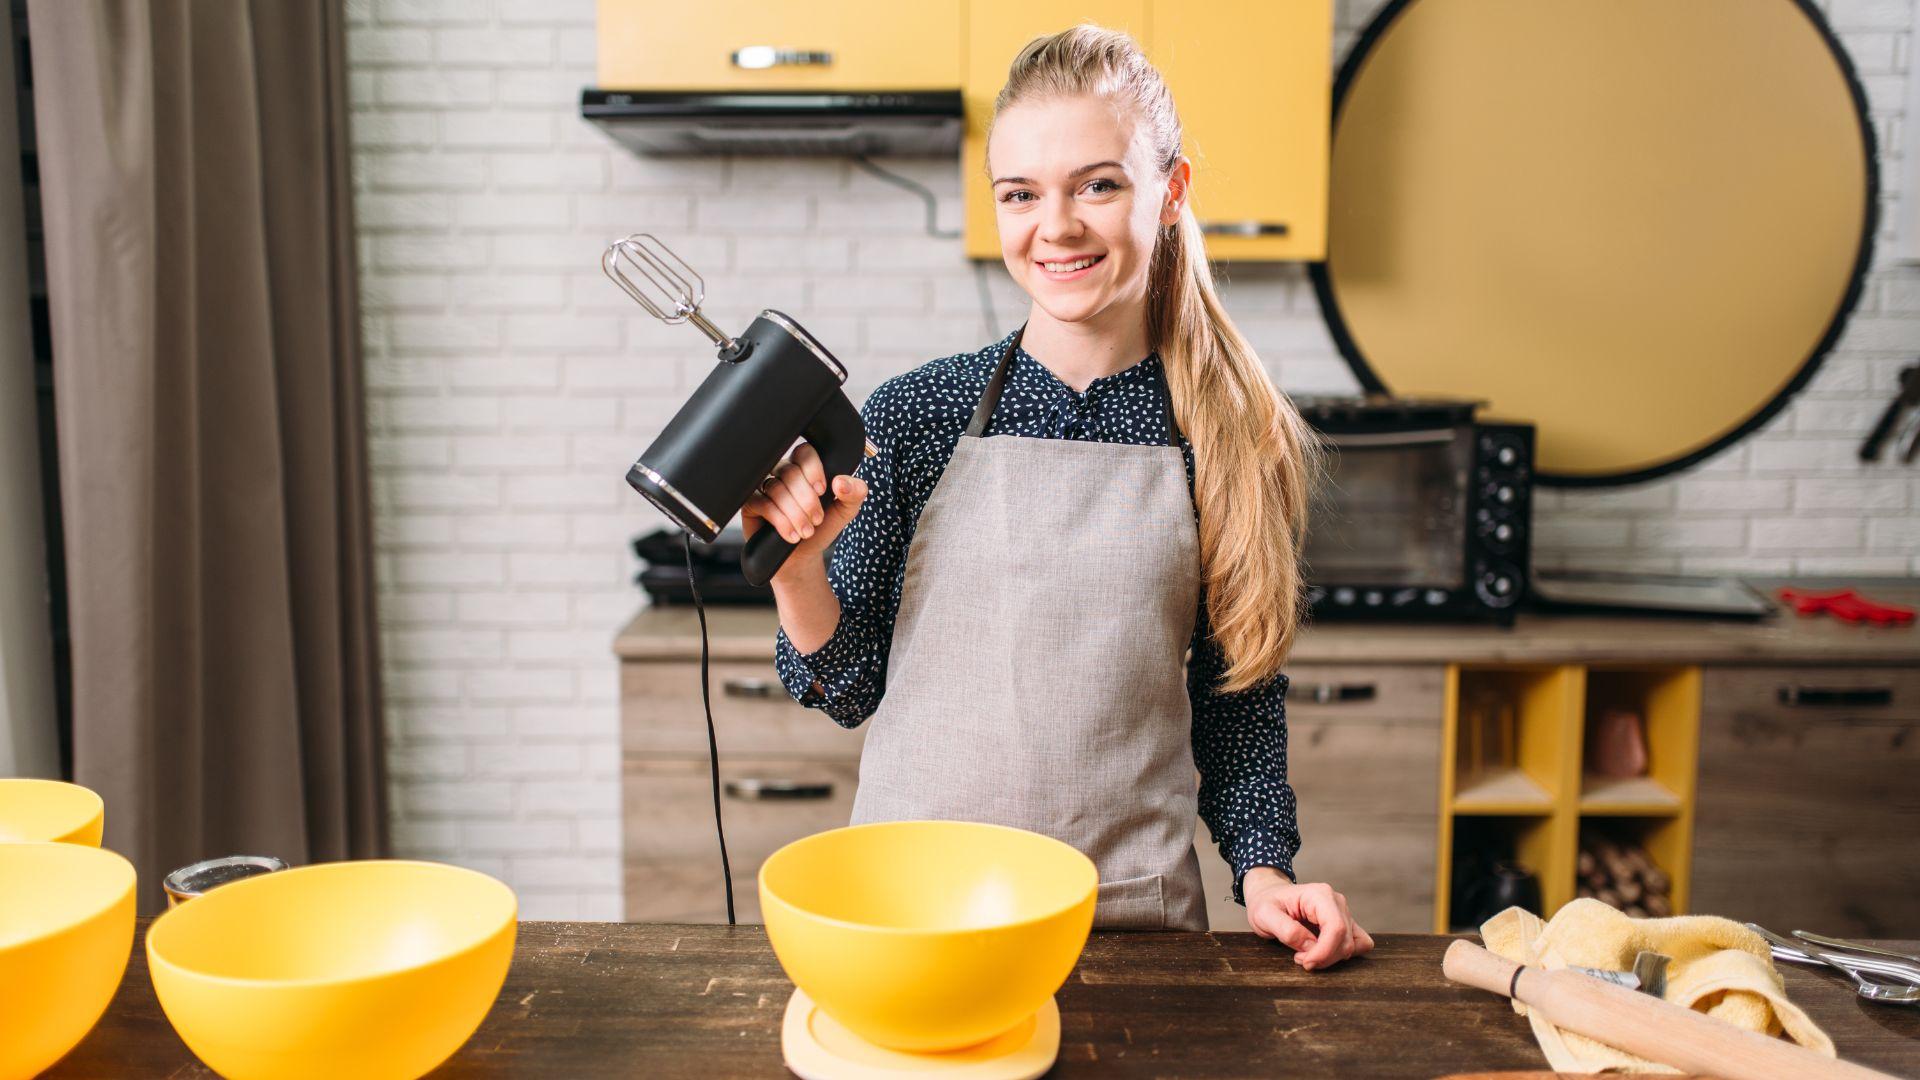 Woman in Apron Adds Sugar into Bowl, Dough Making